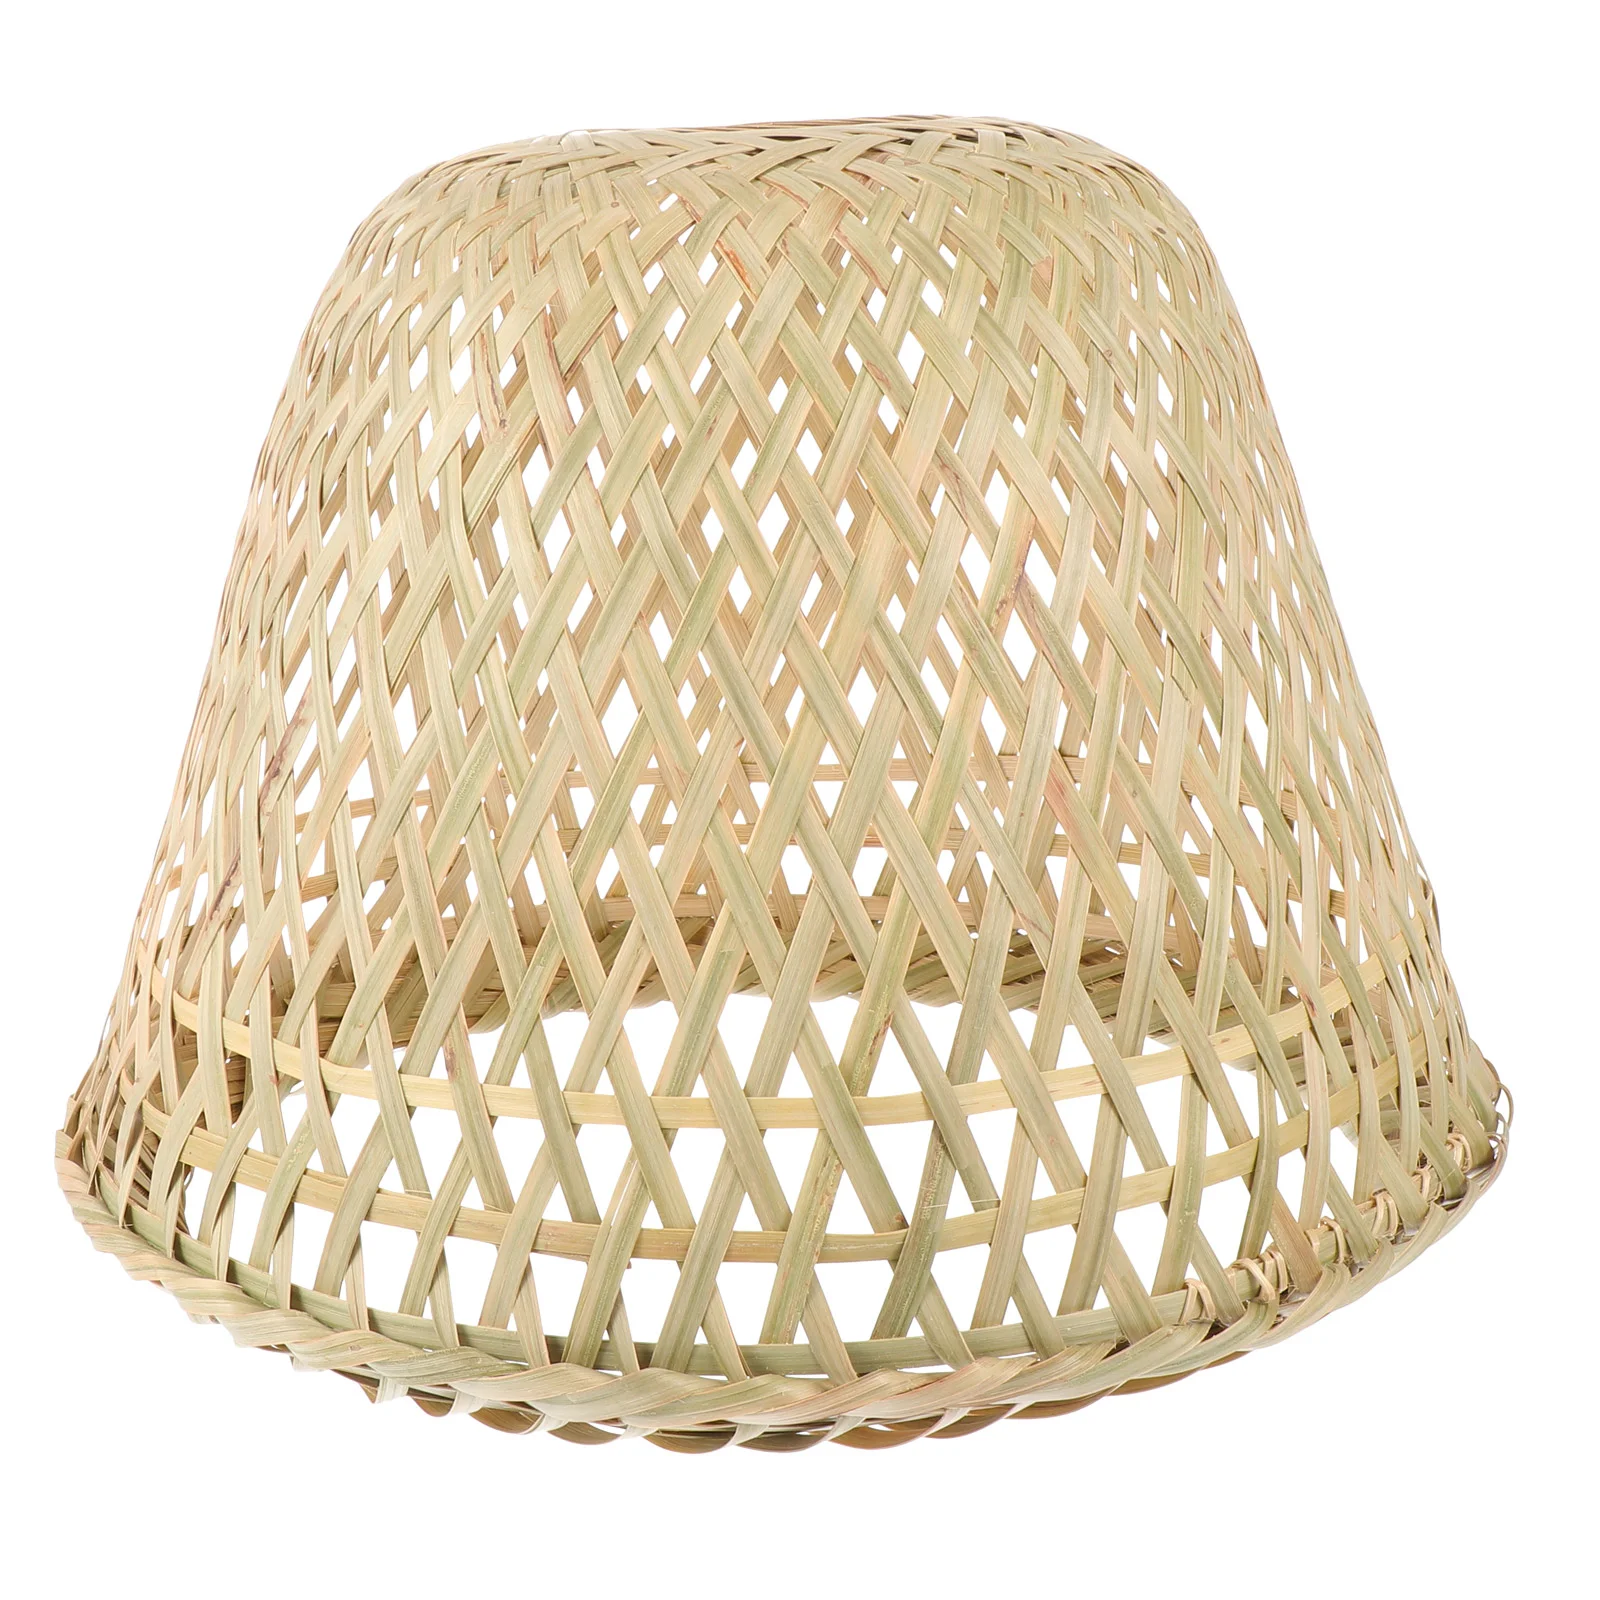 

Rattan Pendant Lamp Shade Replacement Woven Hanging Lampshade Chandelier Cover Natural Wicker Light Shades for Farmhouse Home